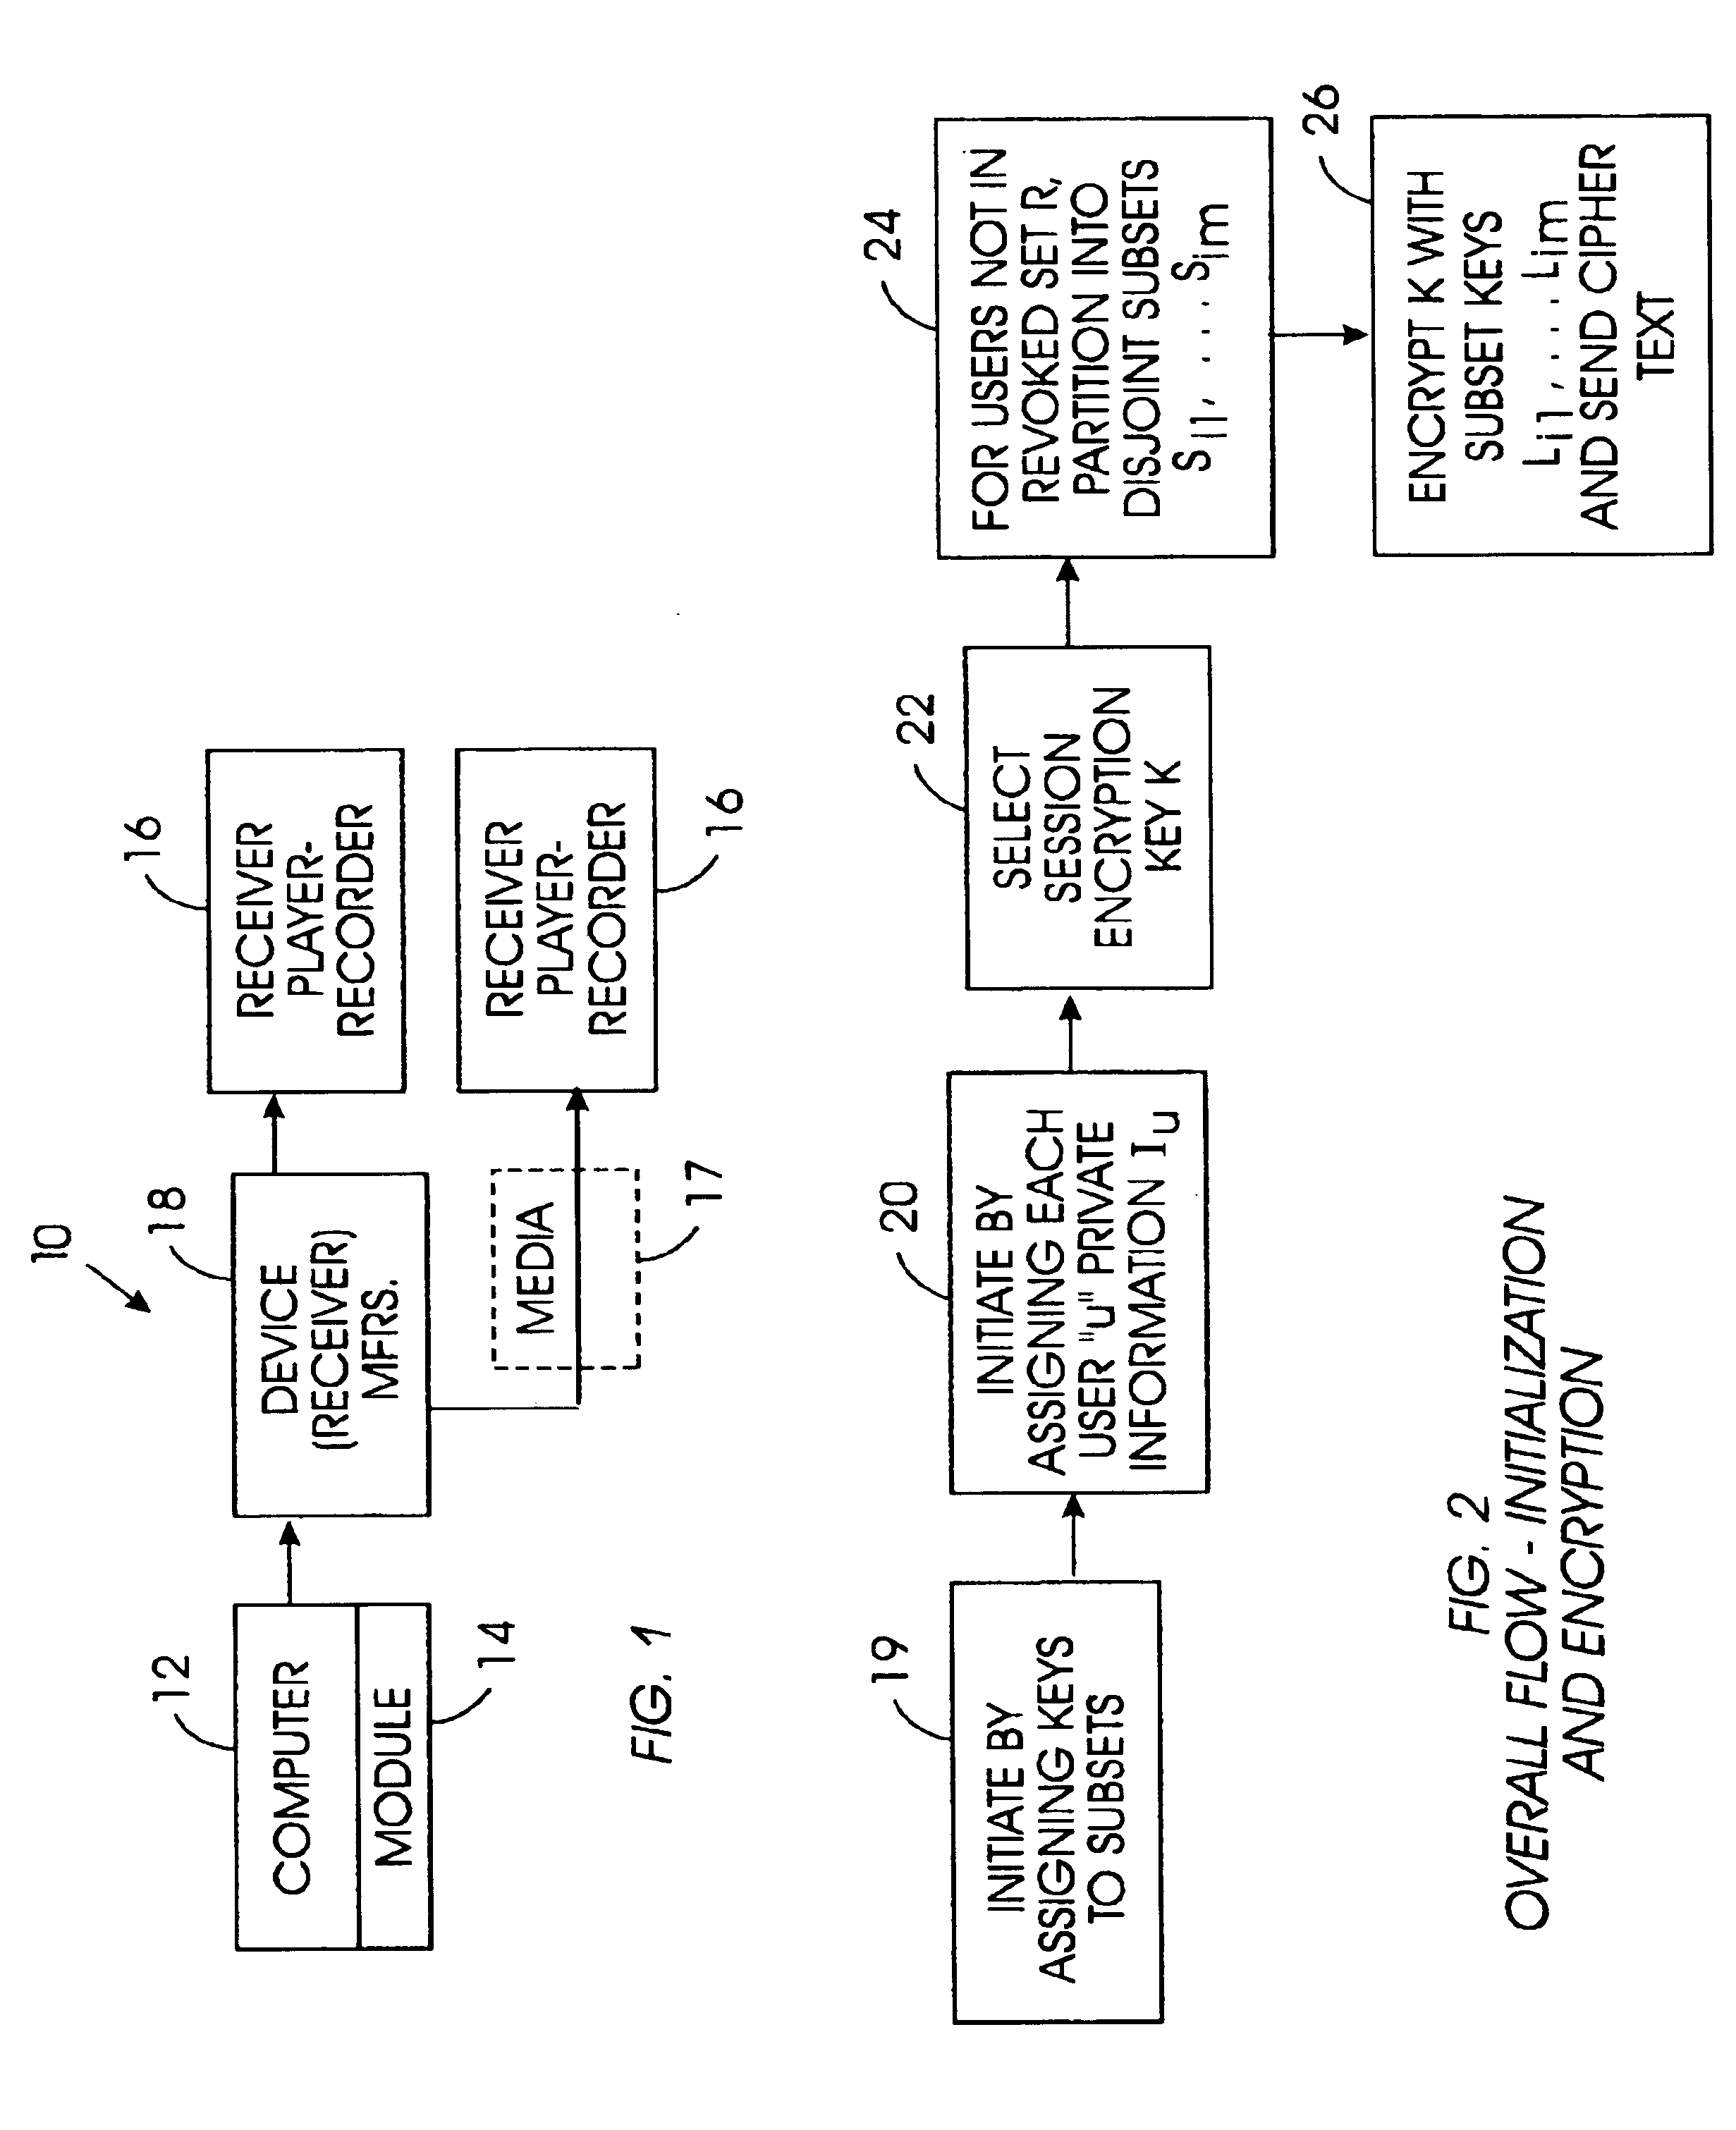 Method for broadcast encryption and key revocation of stateless receivers